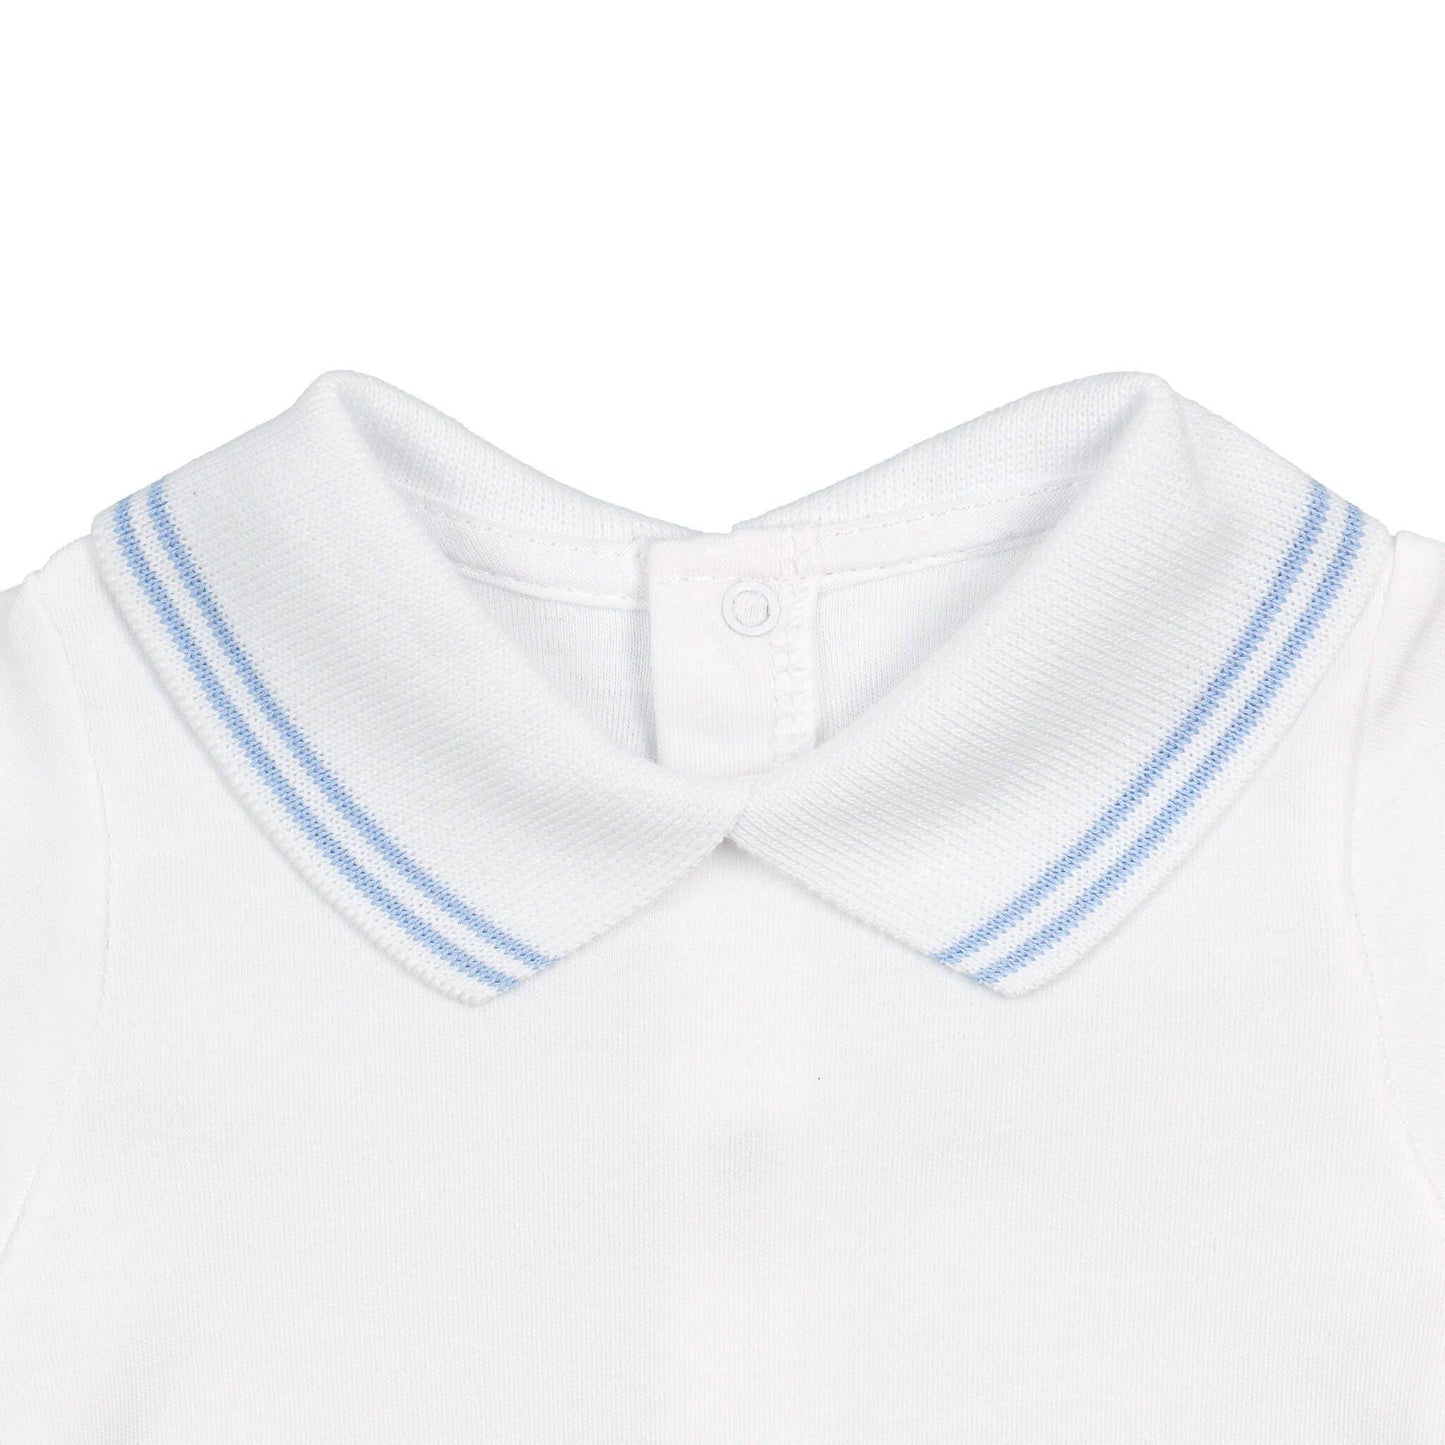 Cotton Baby Bodysuit Onesie with Polo-Style Collar: 6-12M / Short Sleeve / Light Blue